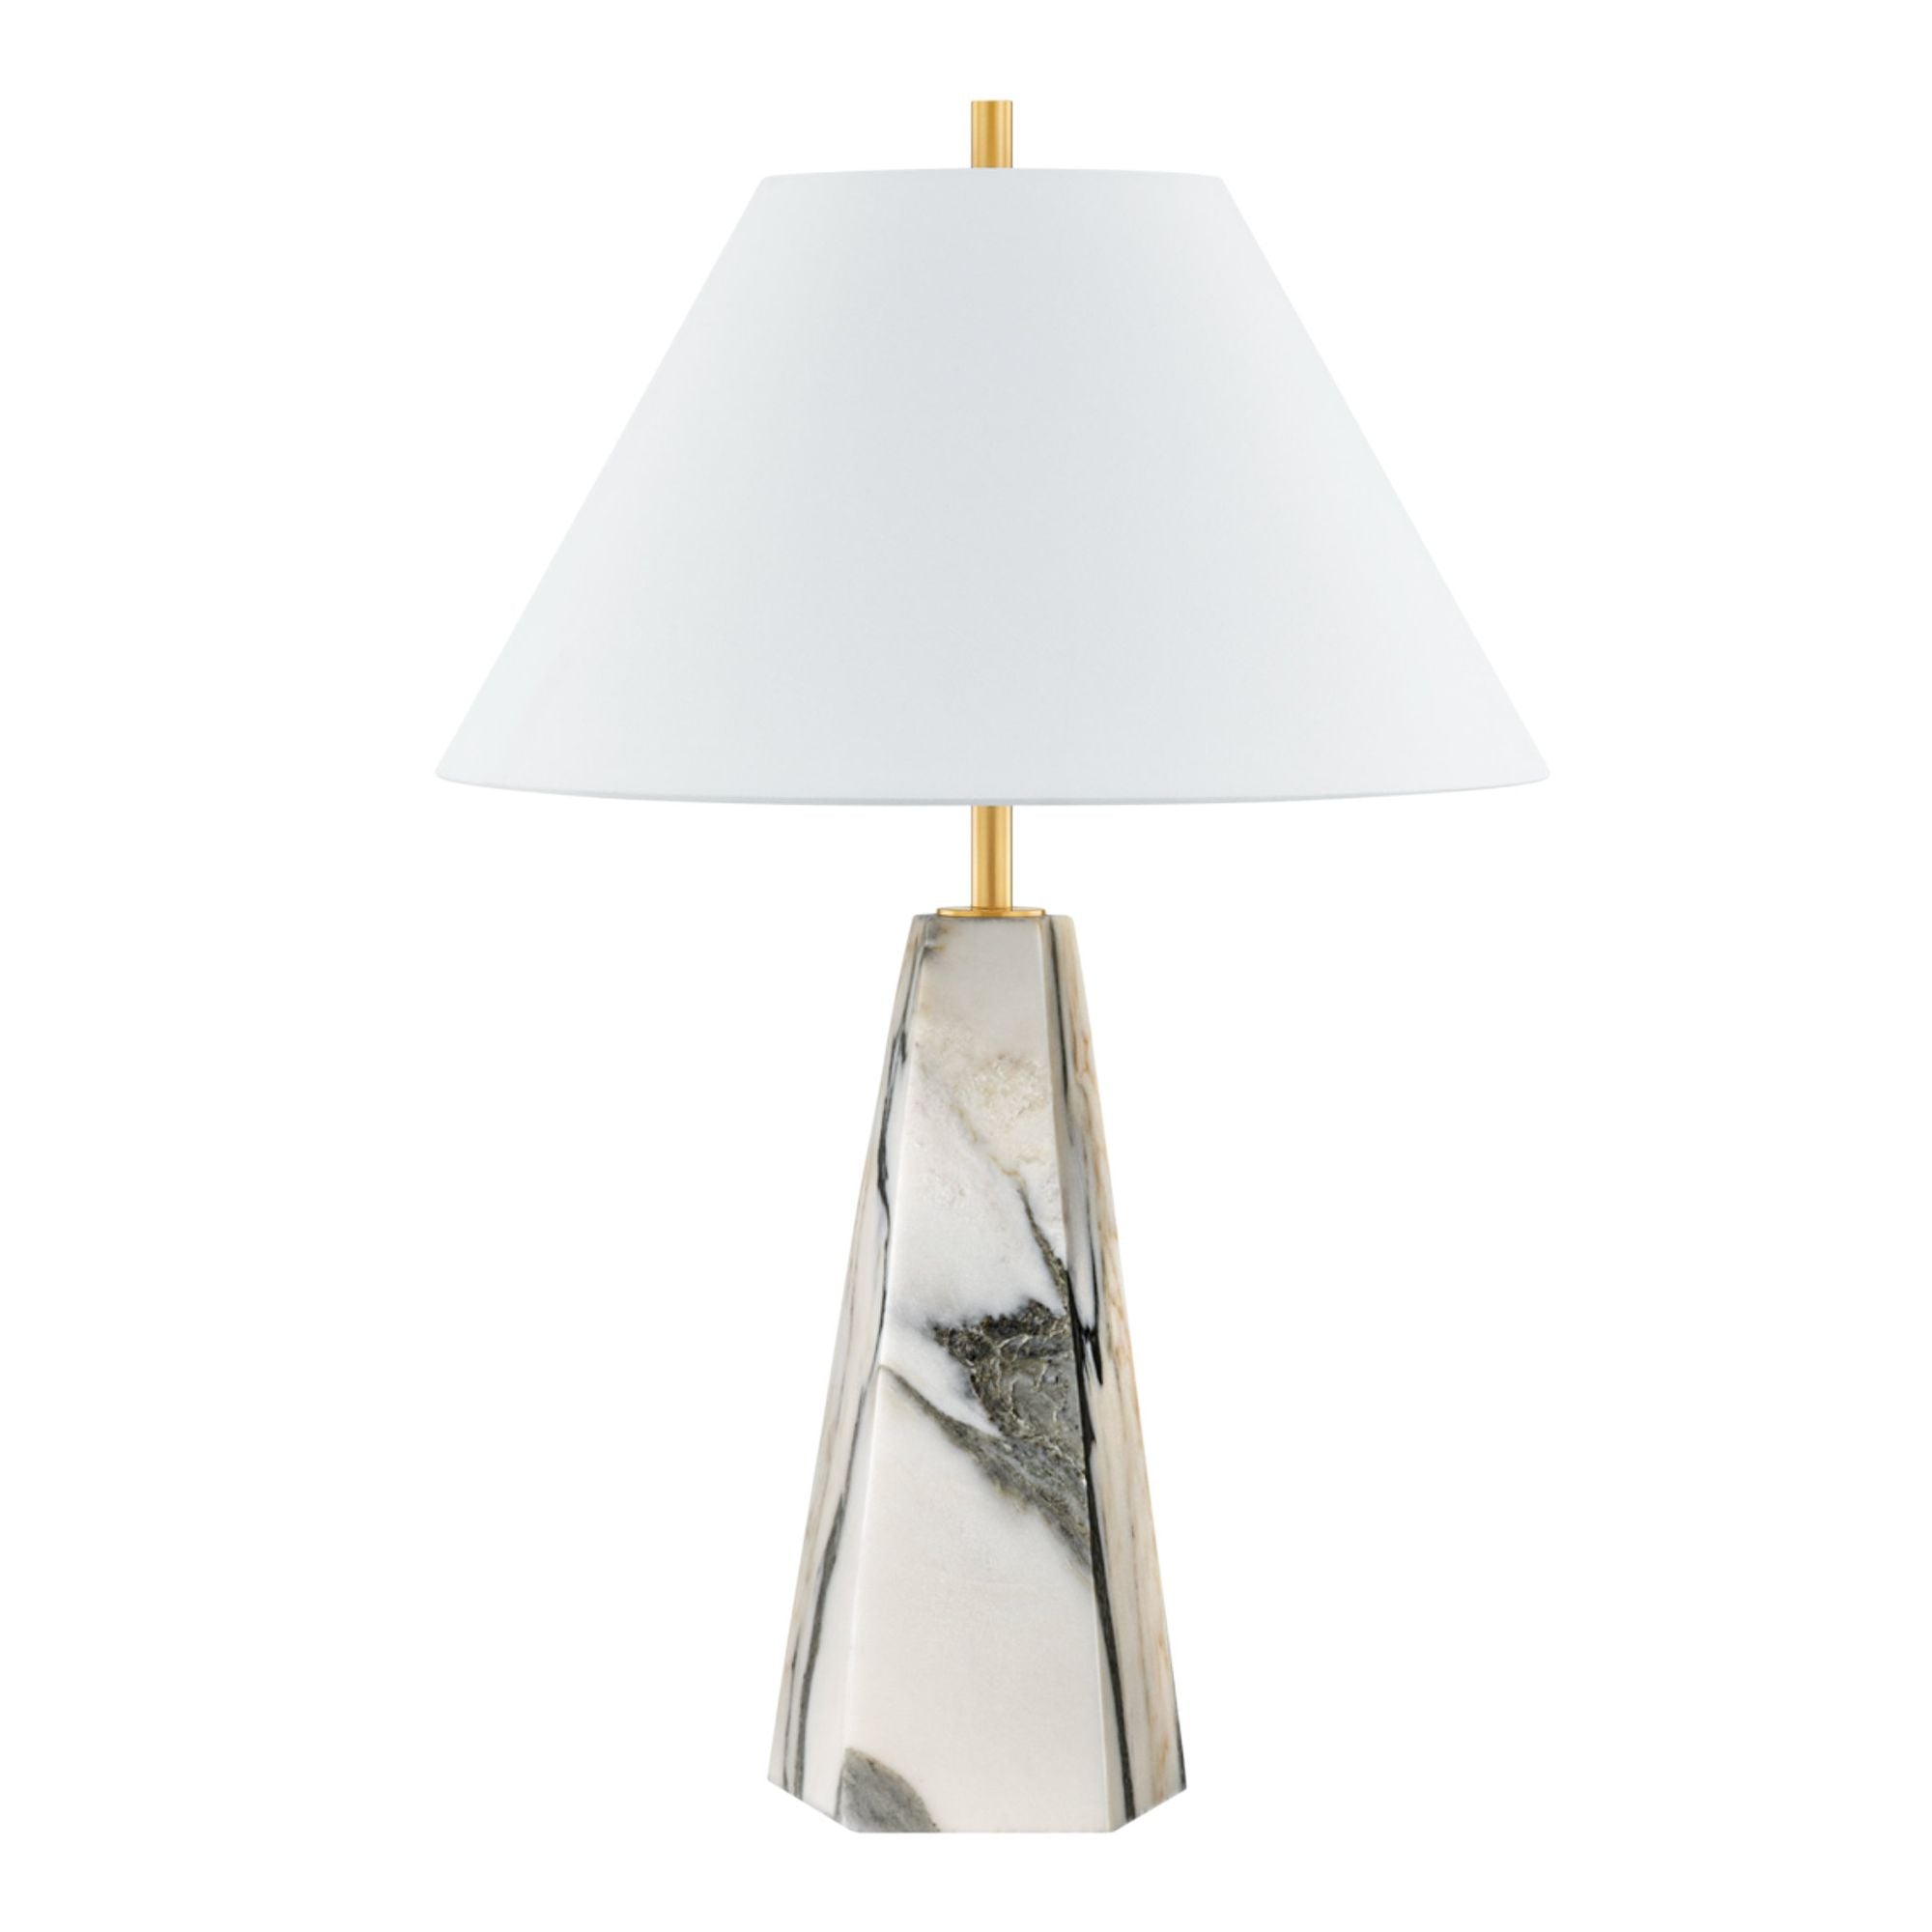 Benicia 1 Light Table Lamp in Aged Brass